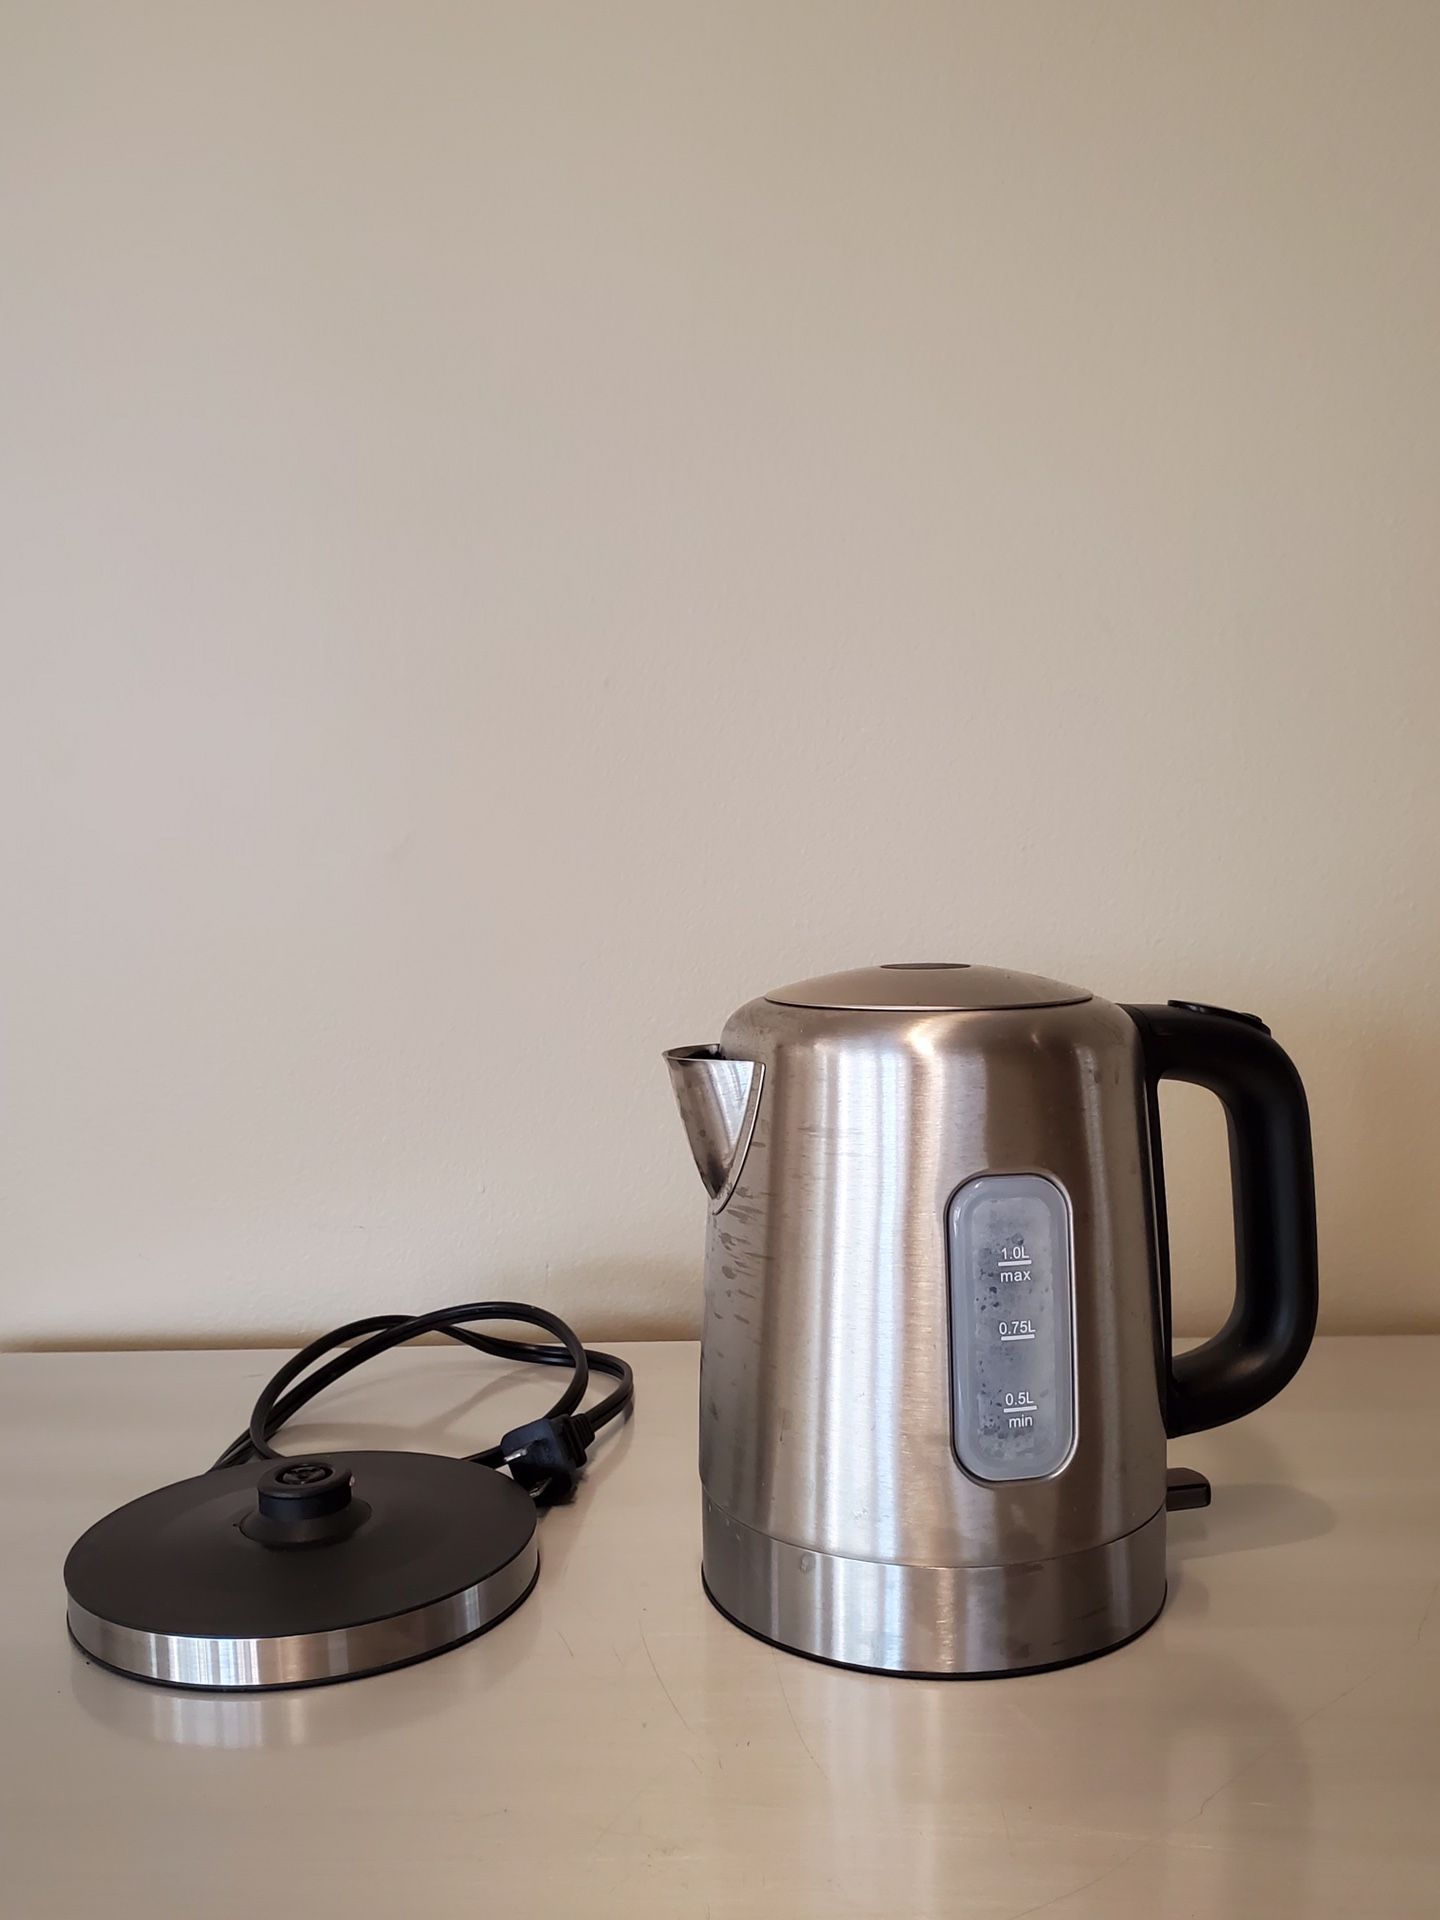 1-Liter CORDLESS ELECTRIC KETTLE - firm price.